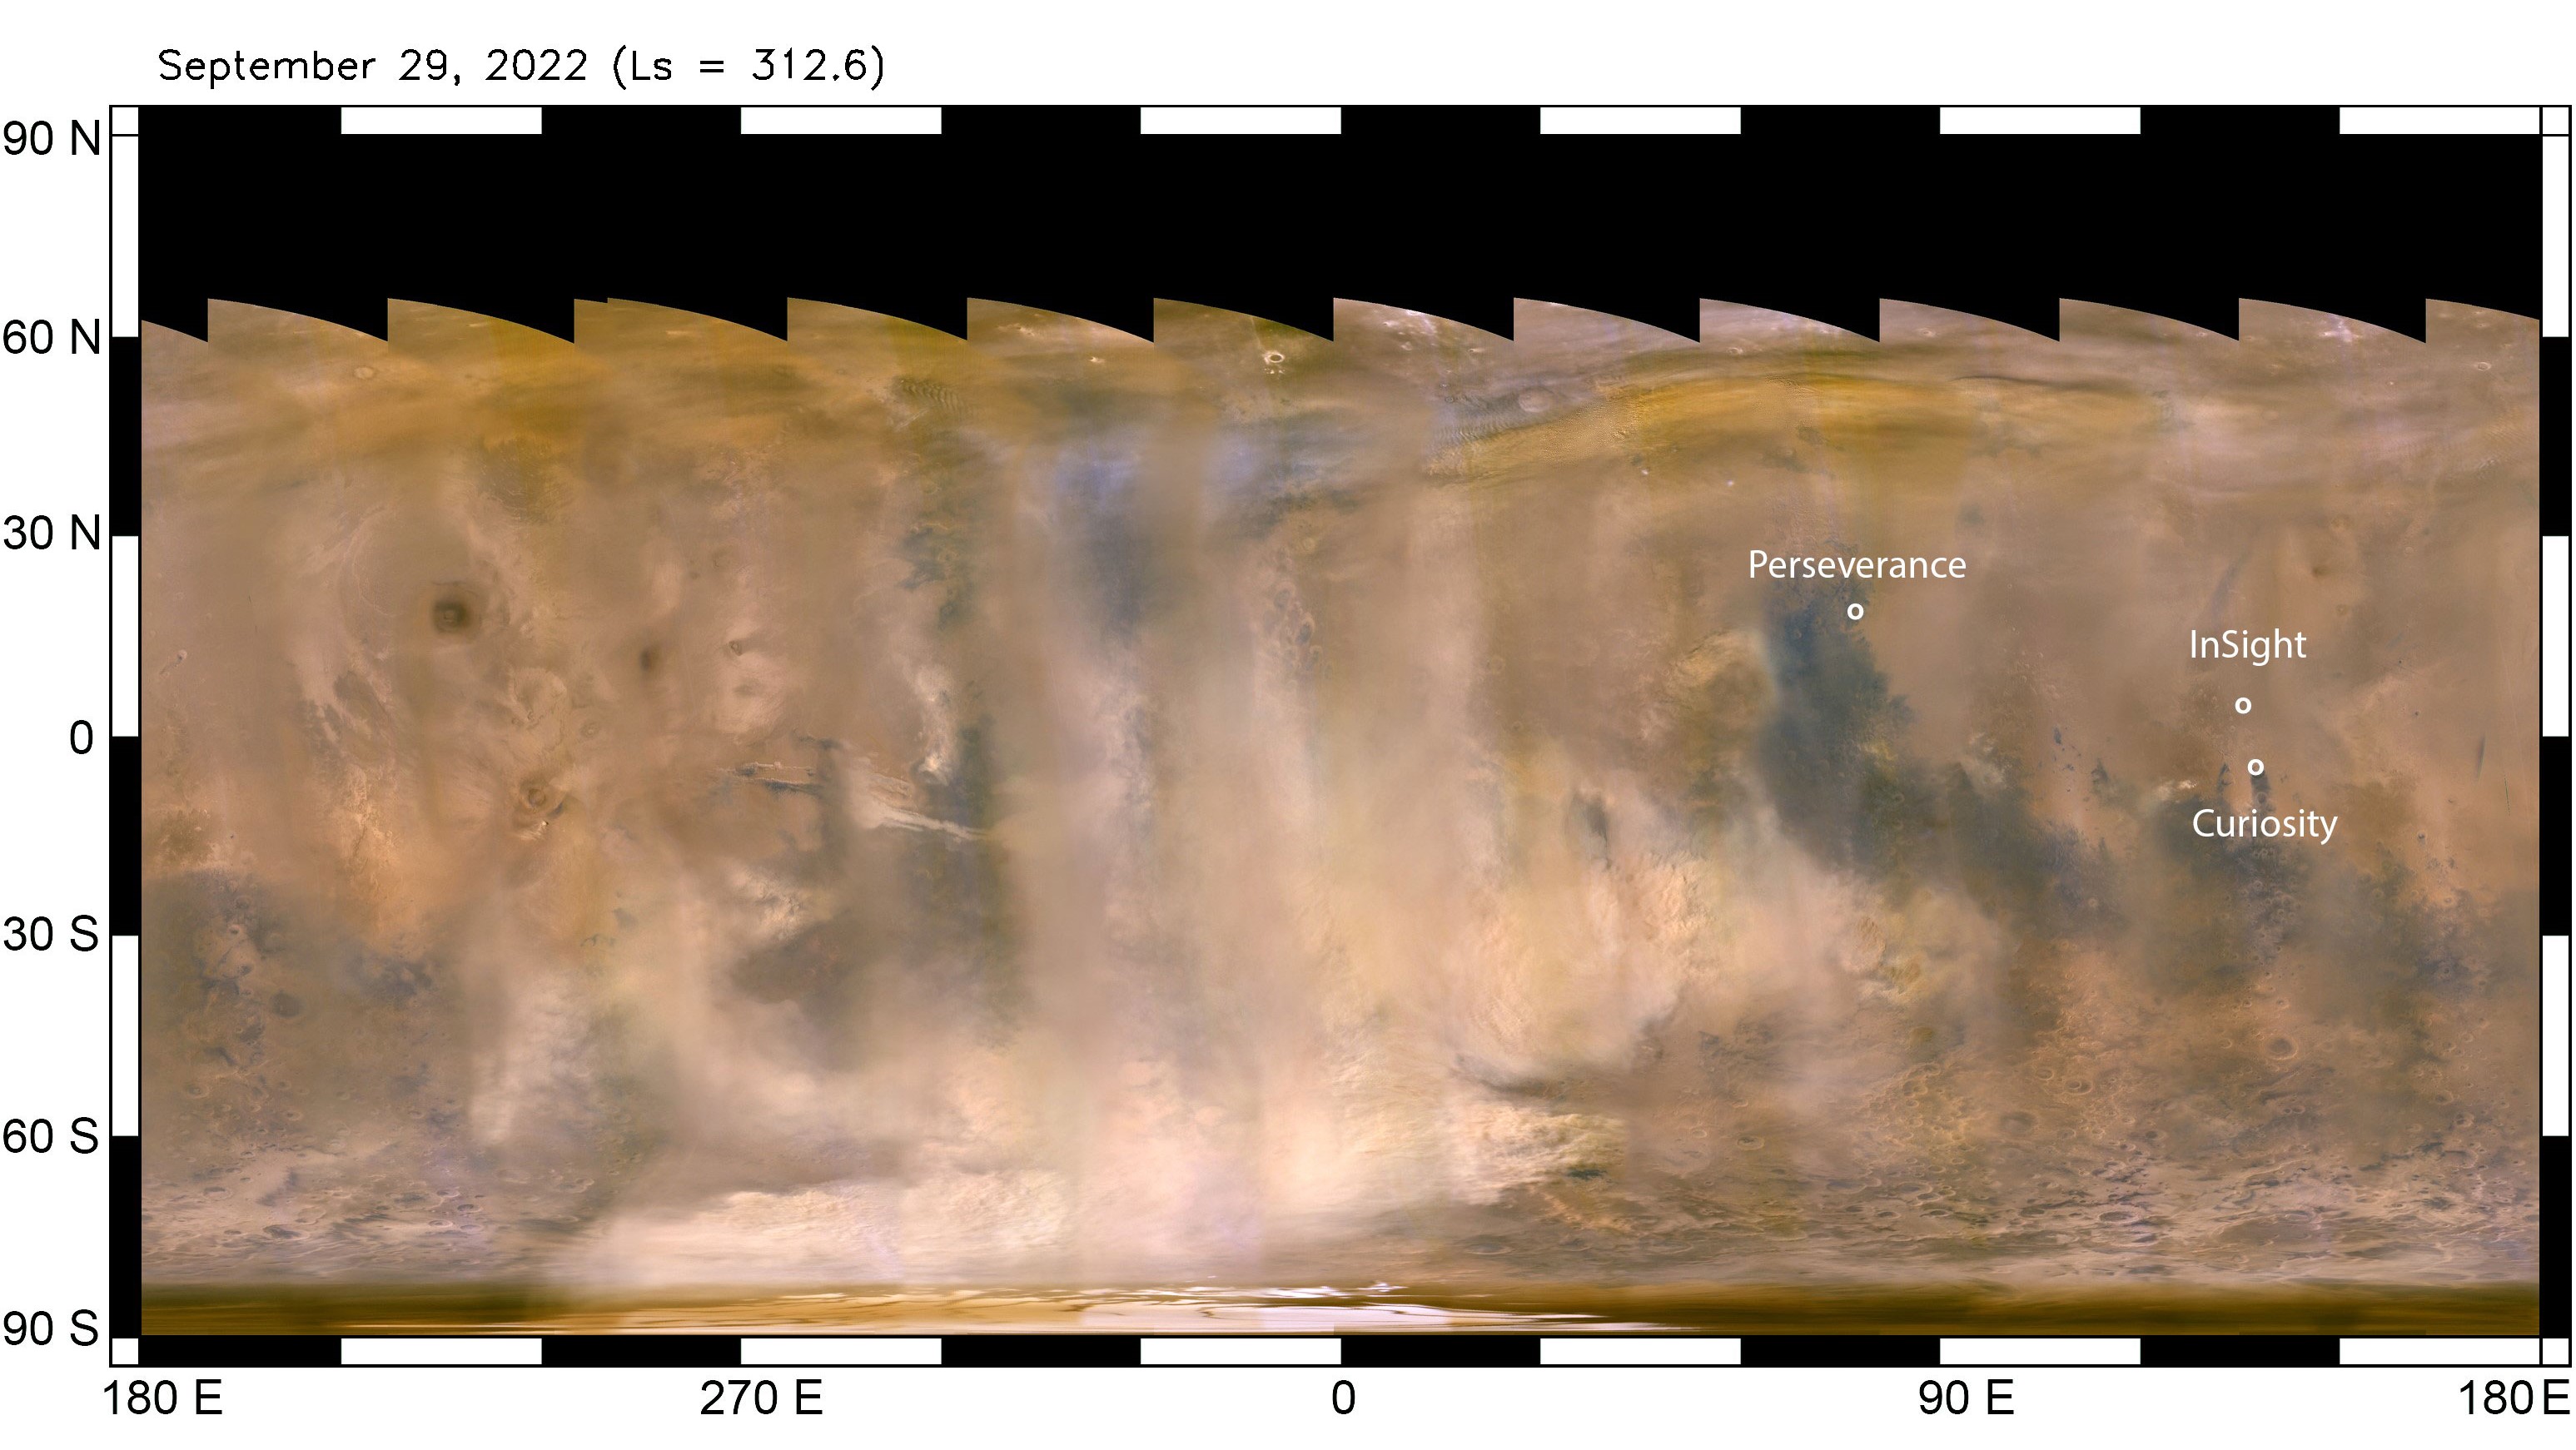 A global map of Mars shows a huge dust storm in the Southern Hemisphere, seen in beige on September 29, 2022.